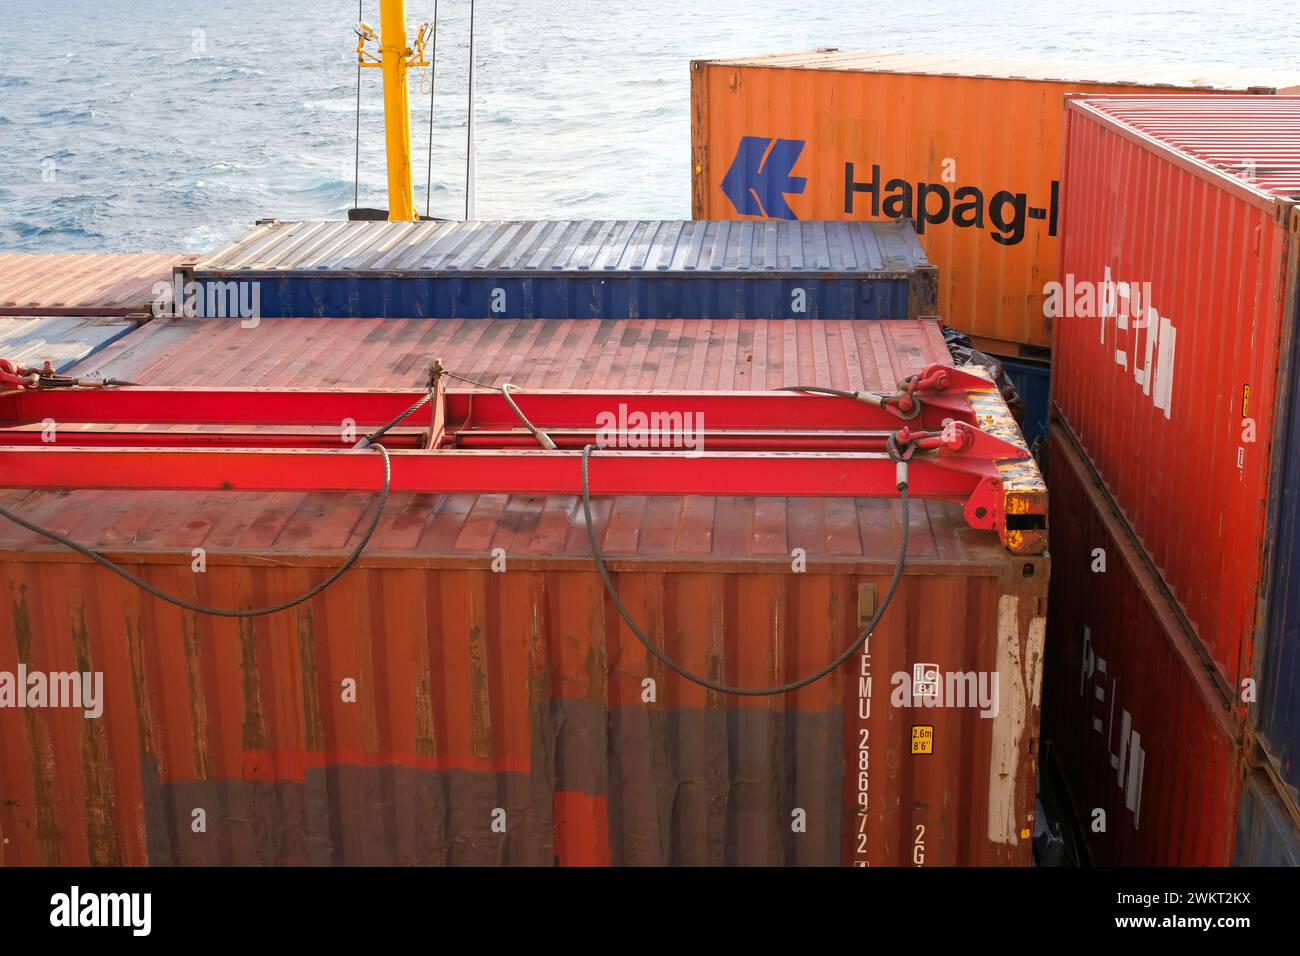 Surabaya, Indonesia, 28 July 2023: Piles of containers loaded on big container ships Stock Photo